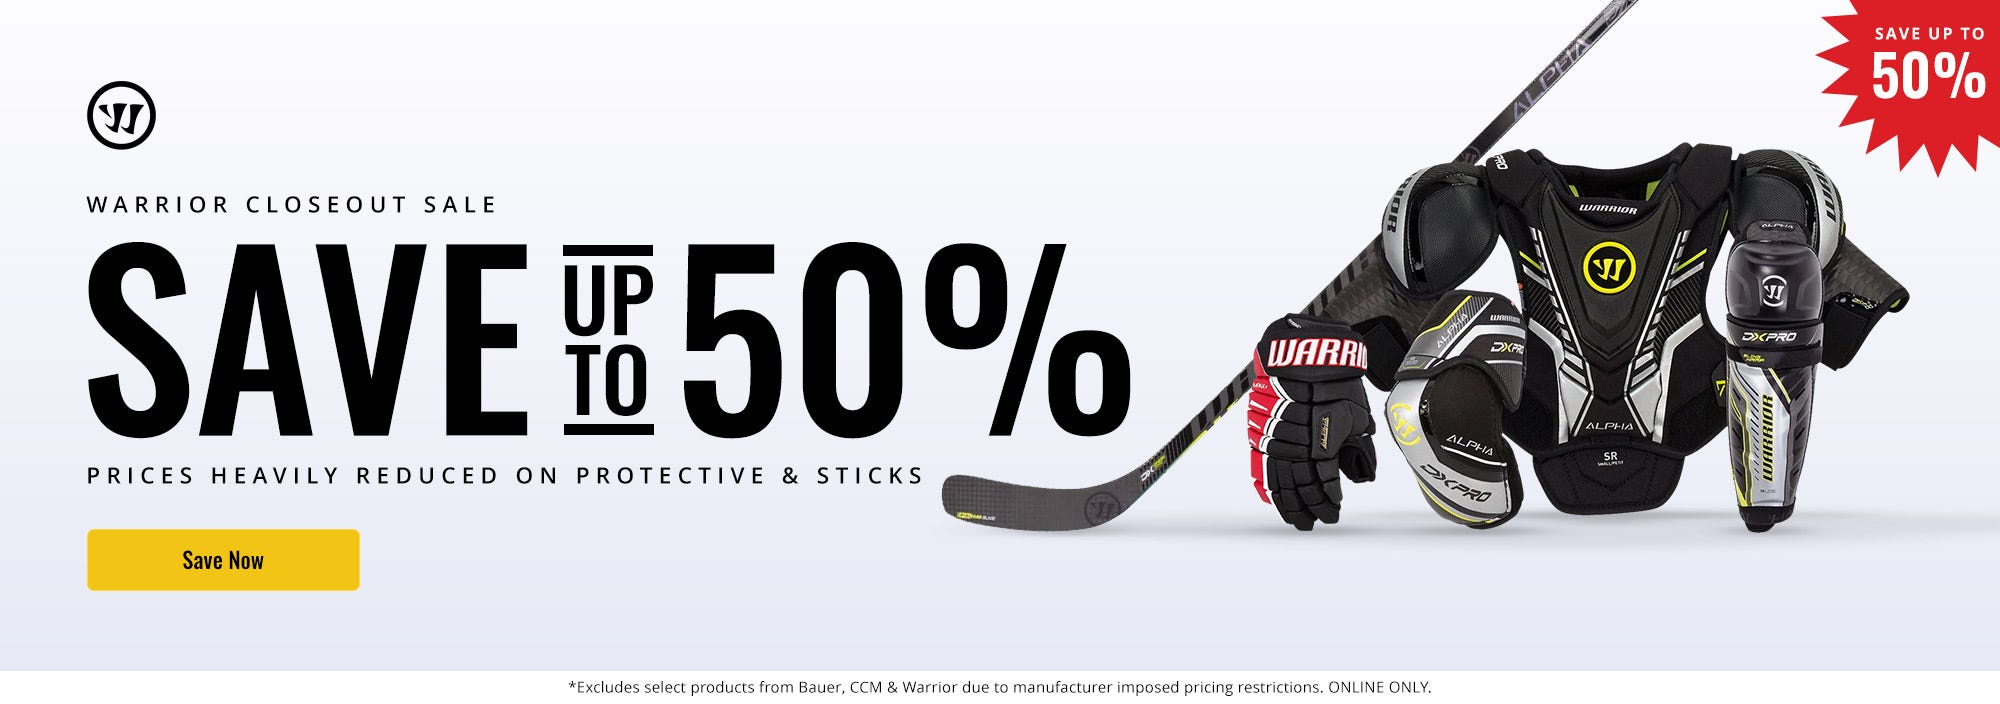  Warrior Closeout Sale: Save up to 50% on Protective and Sticks